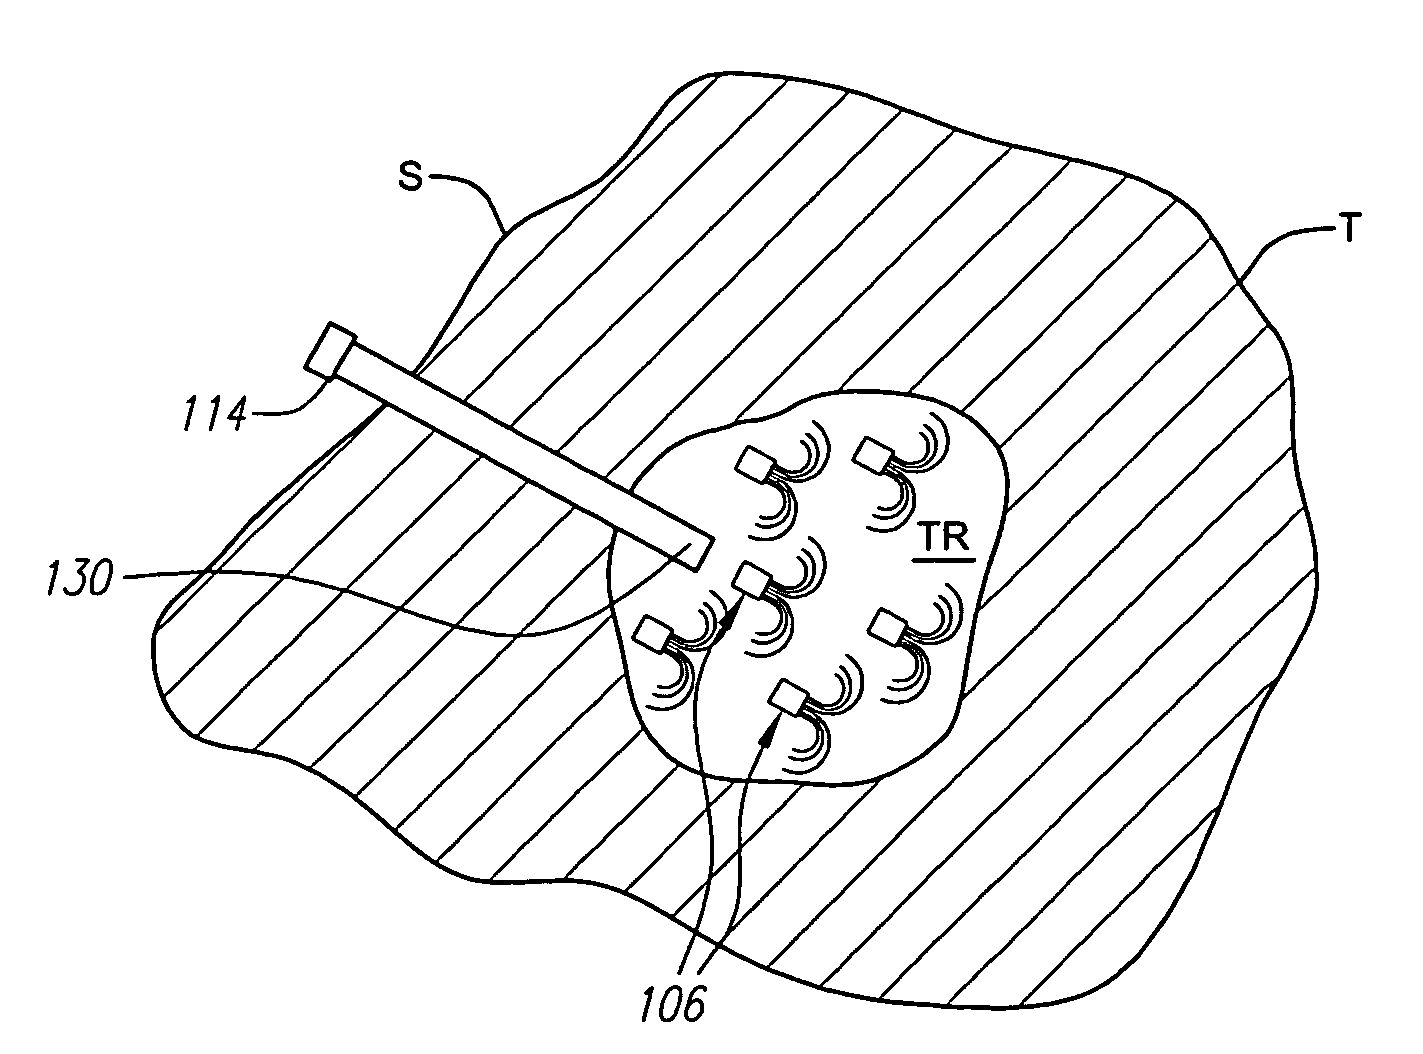 System for indirectly ablating tissue using implanted electrode devices